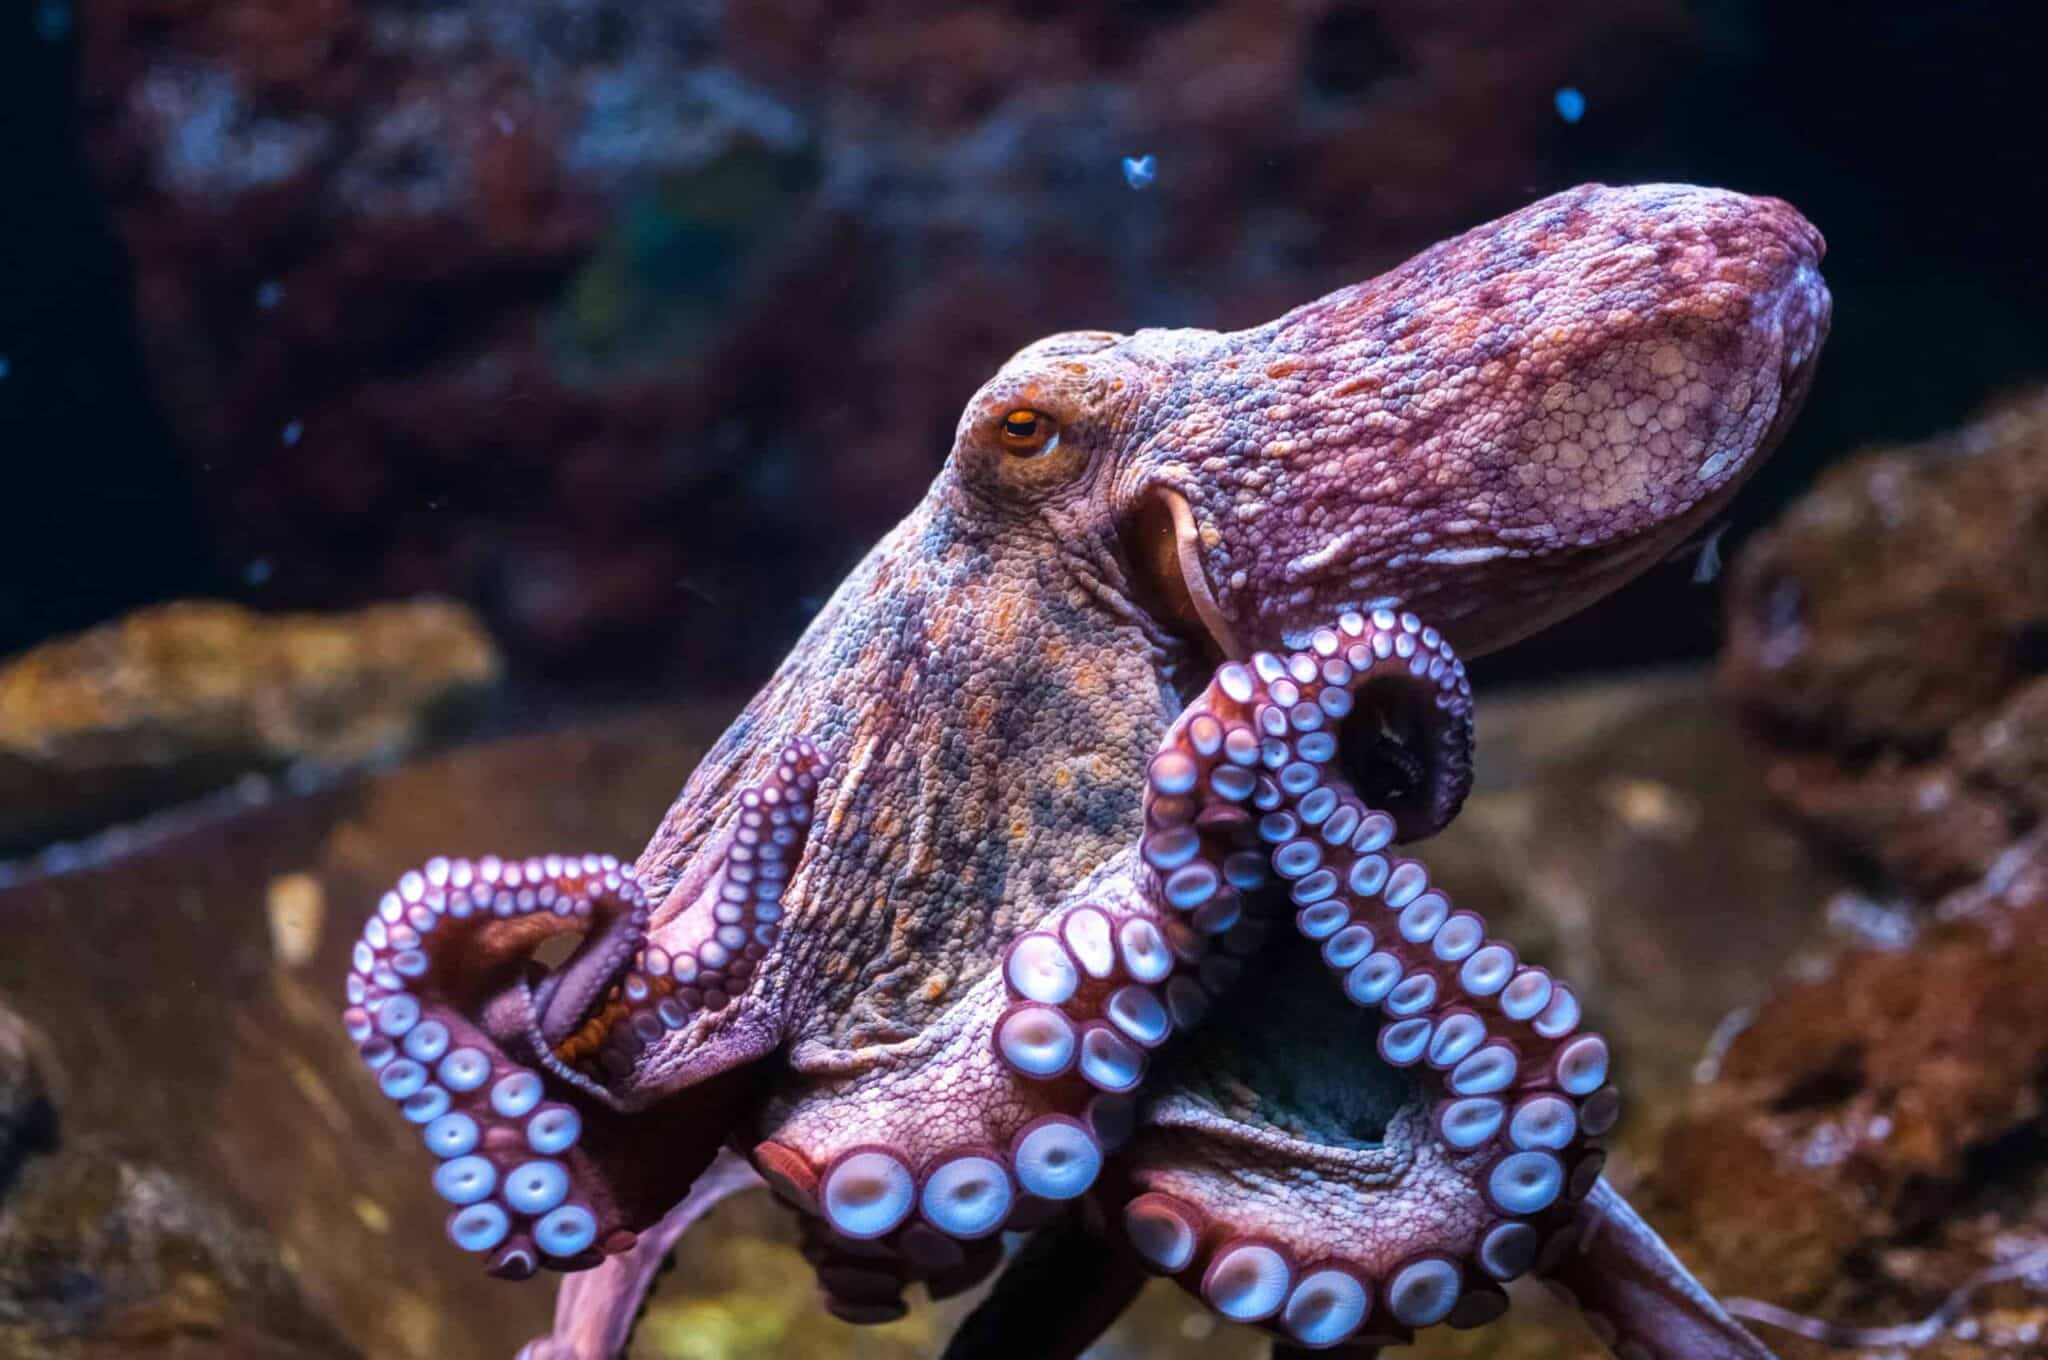  Do Octopus Have Ears